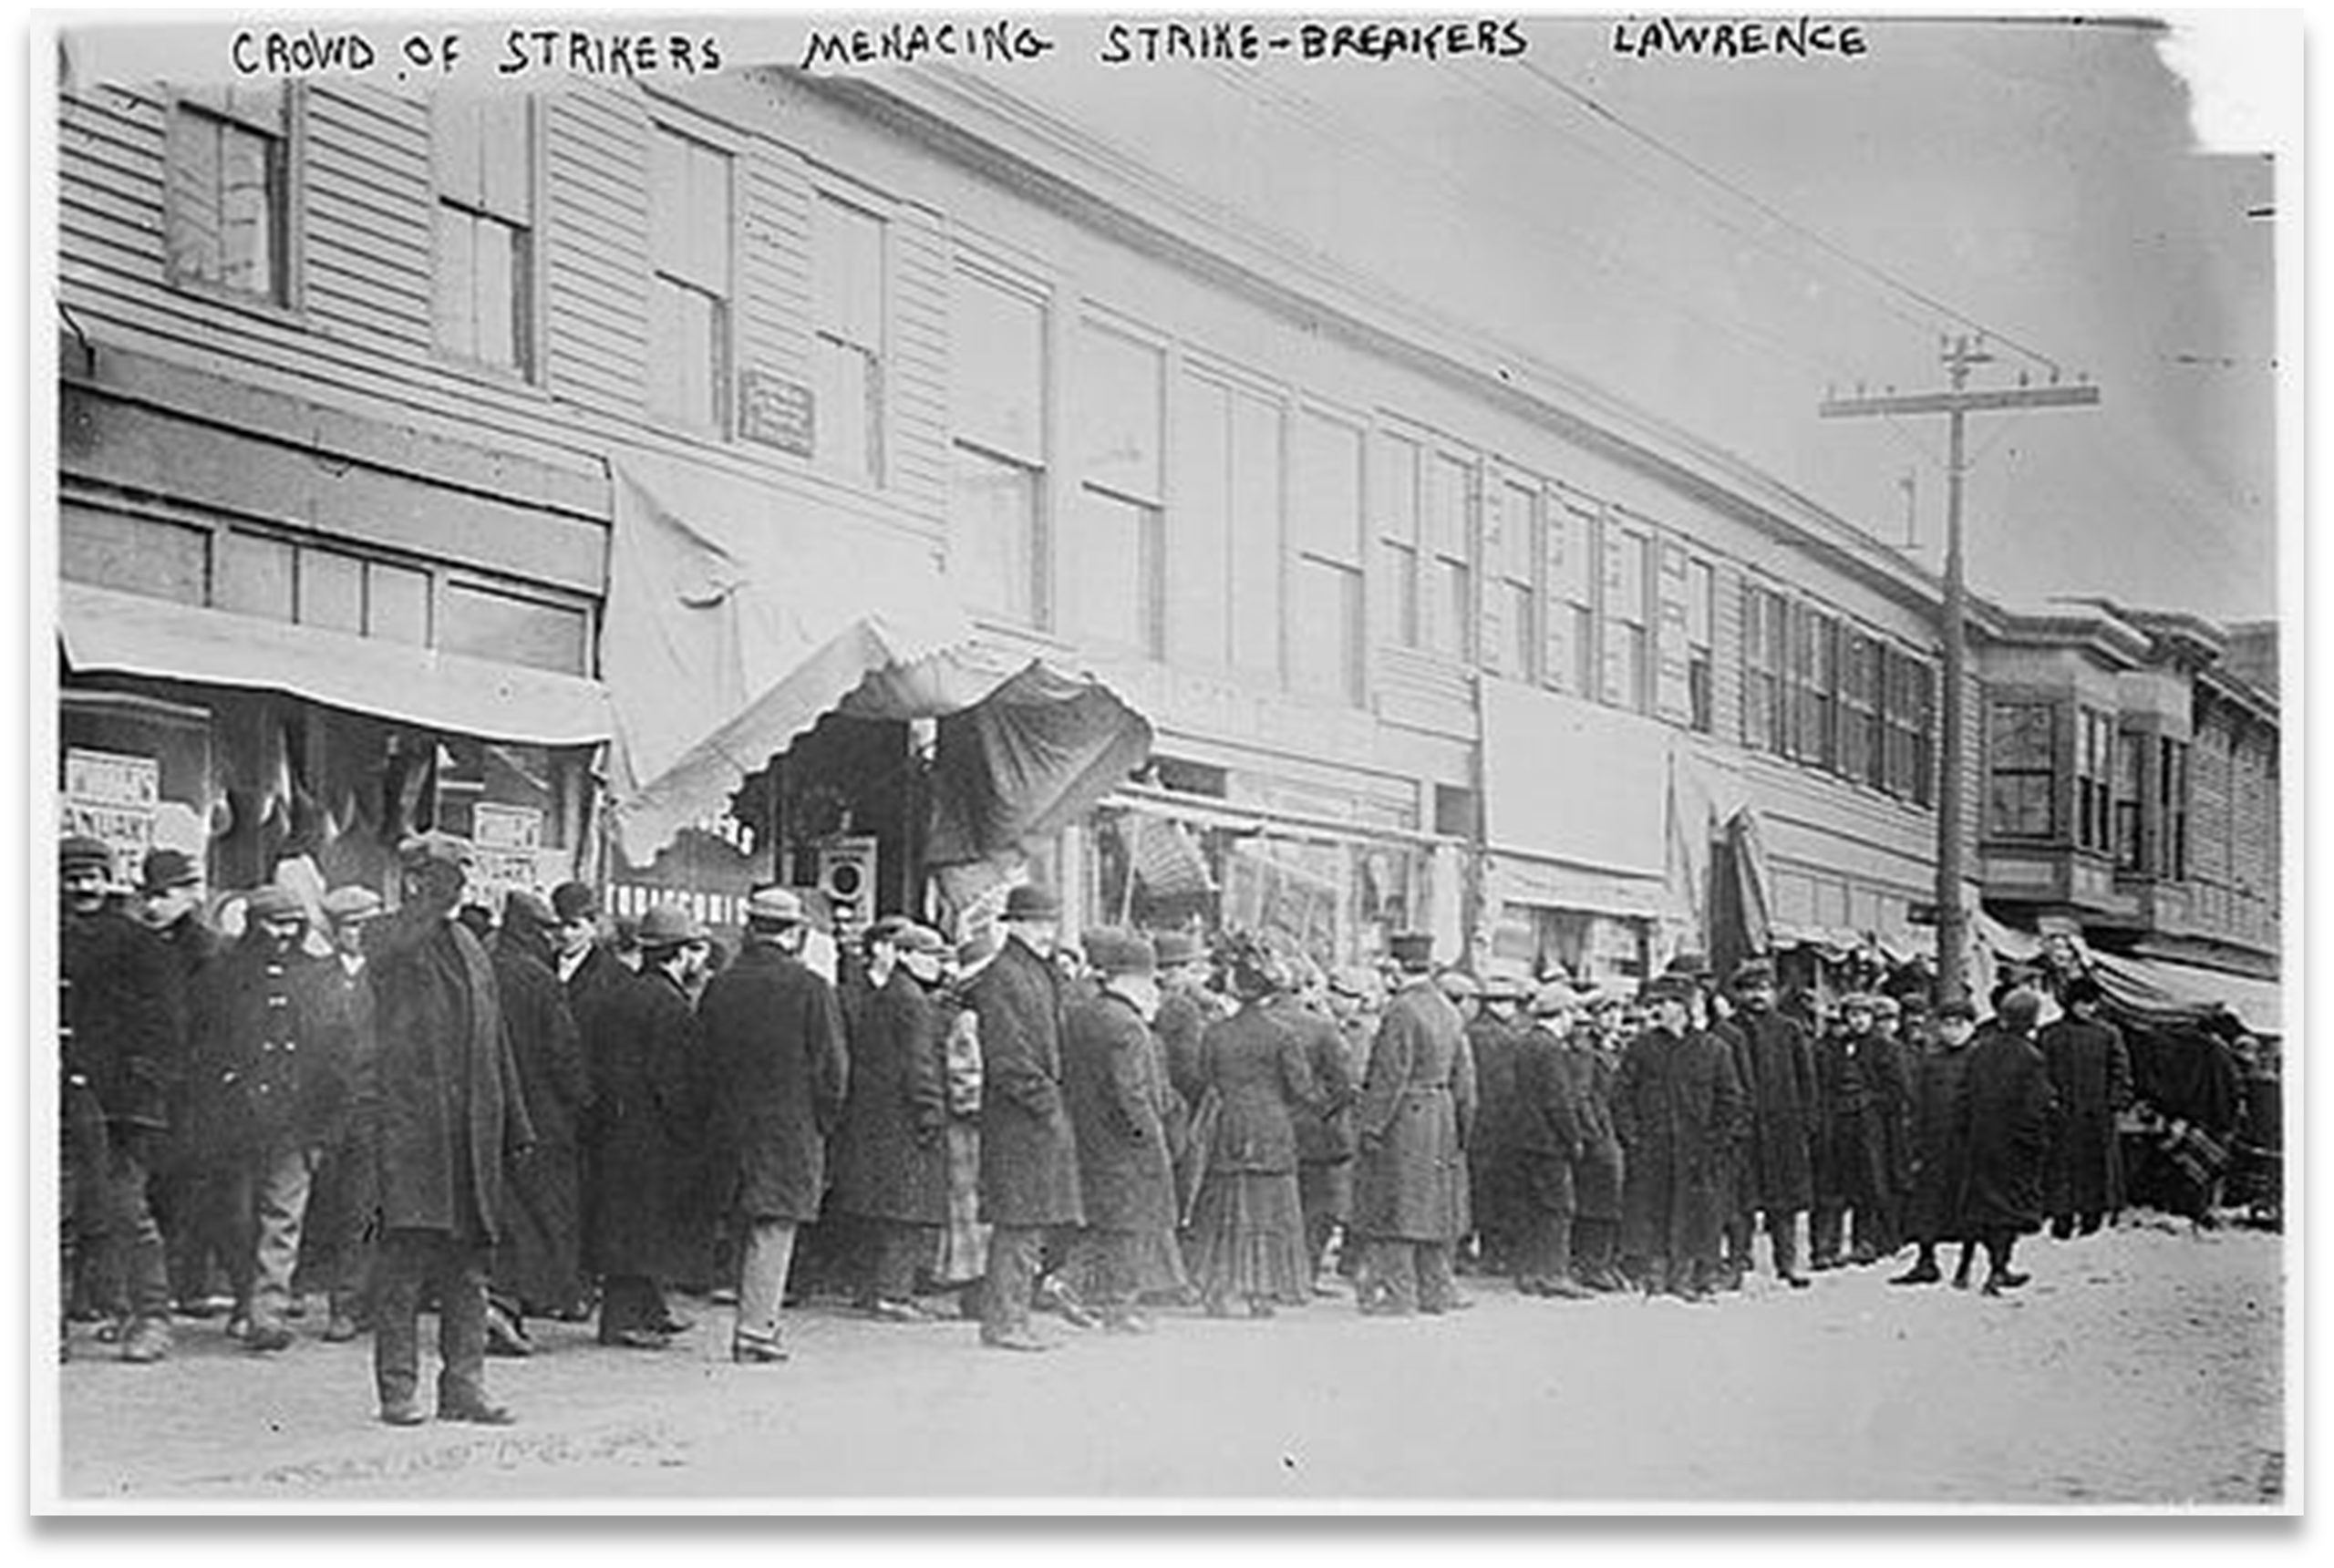 Lawrence textile mill strike, 1912